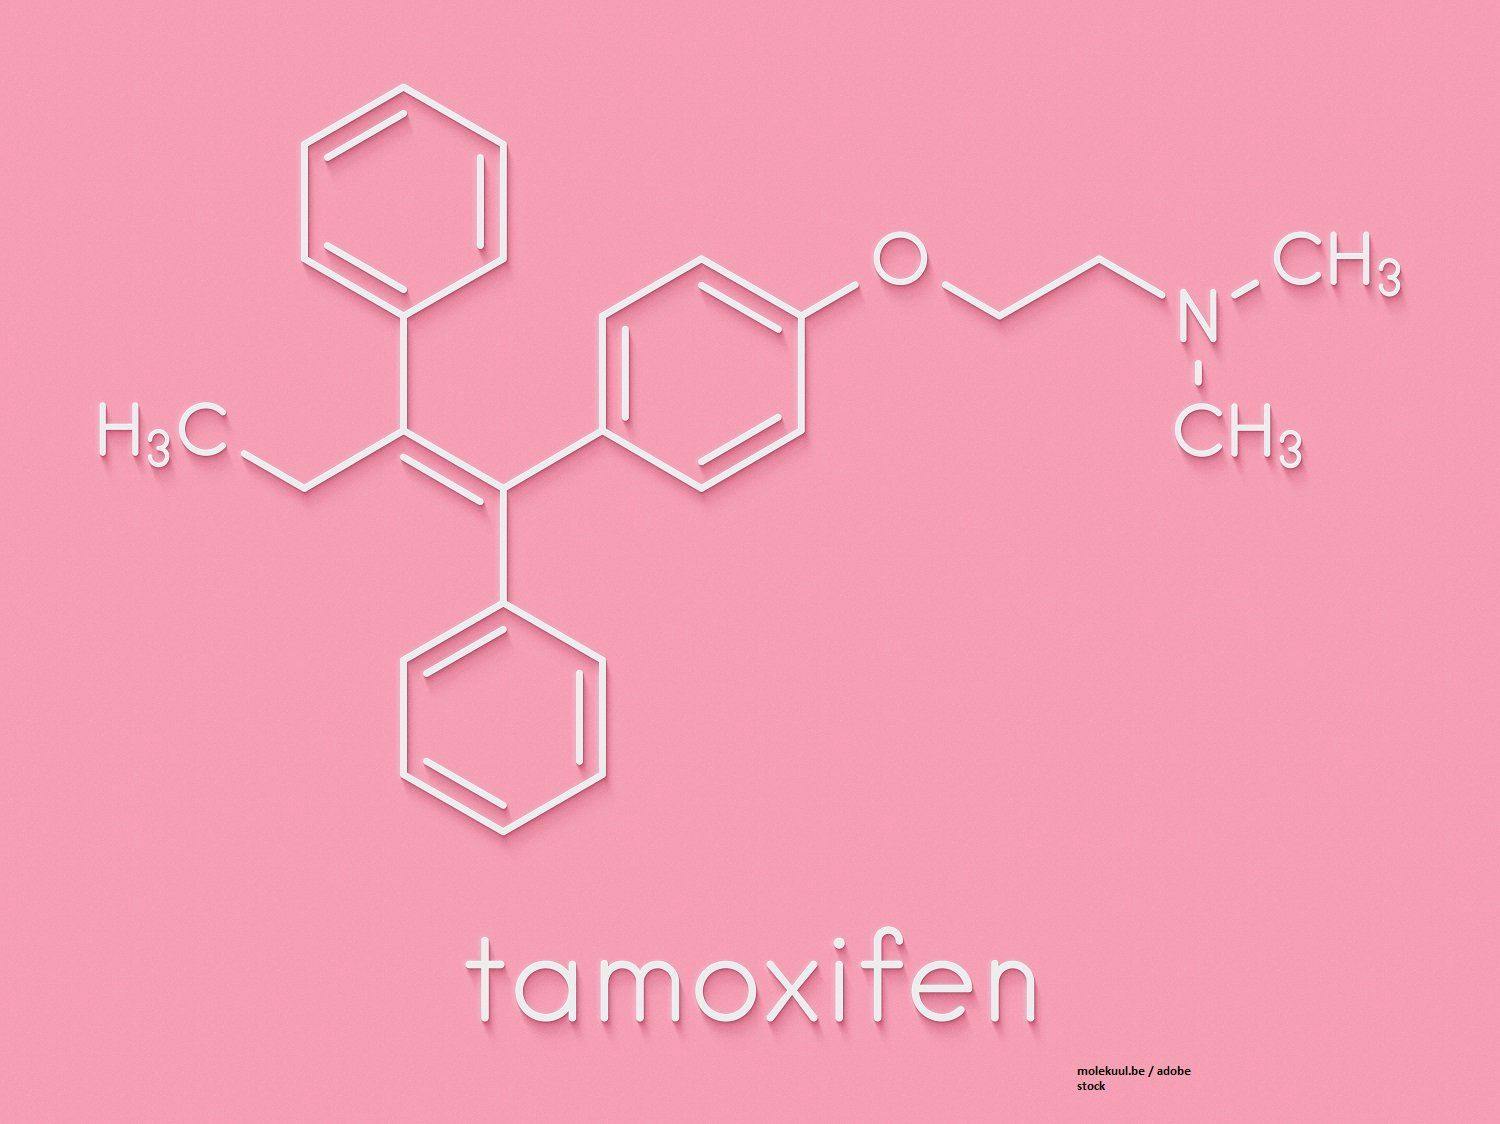 Can Low-Dose Tamoxifen Prevent Recurrences With Reduced Toxicity?